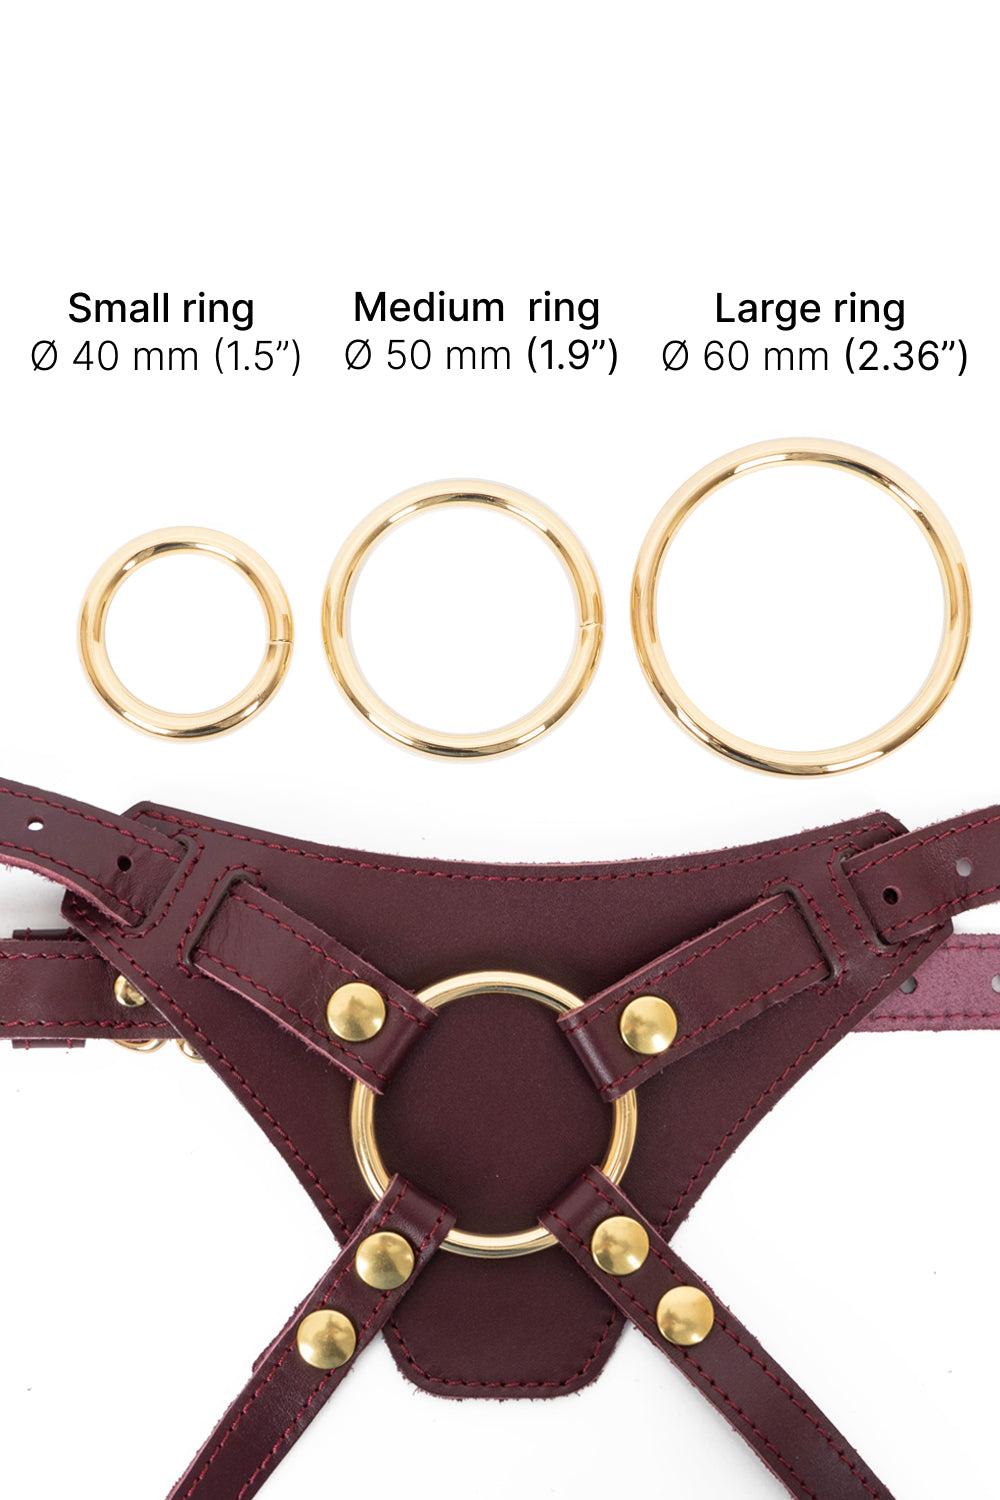 Leather panties crotchless with 3 strap-on O-rings. Burgundy